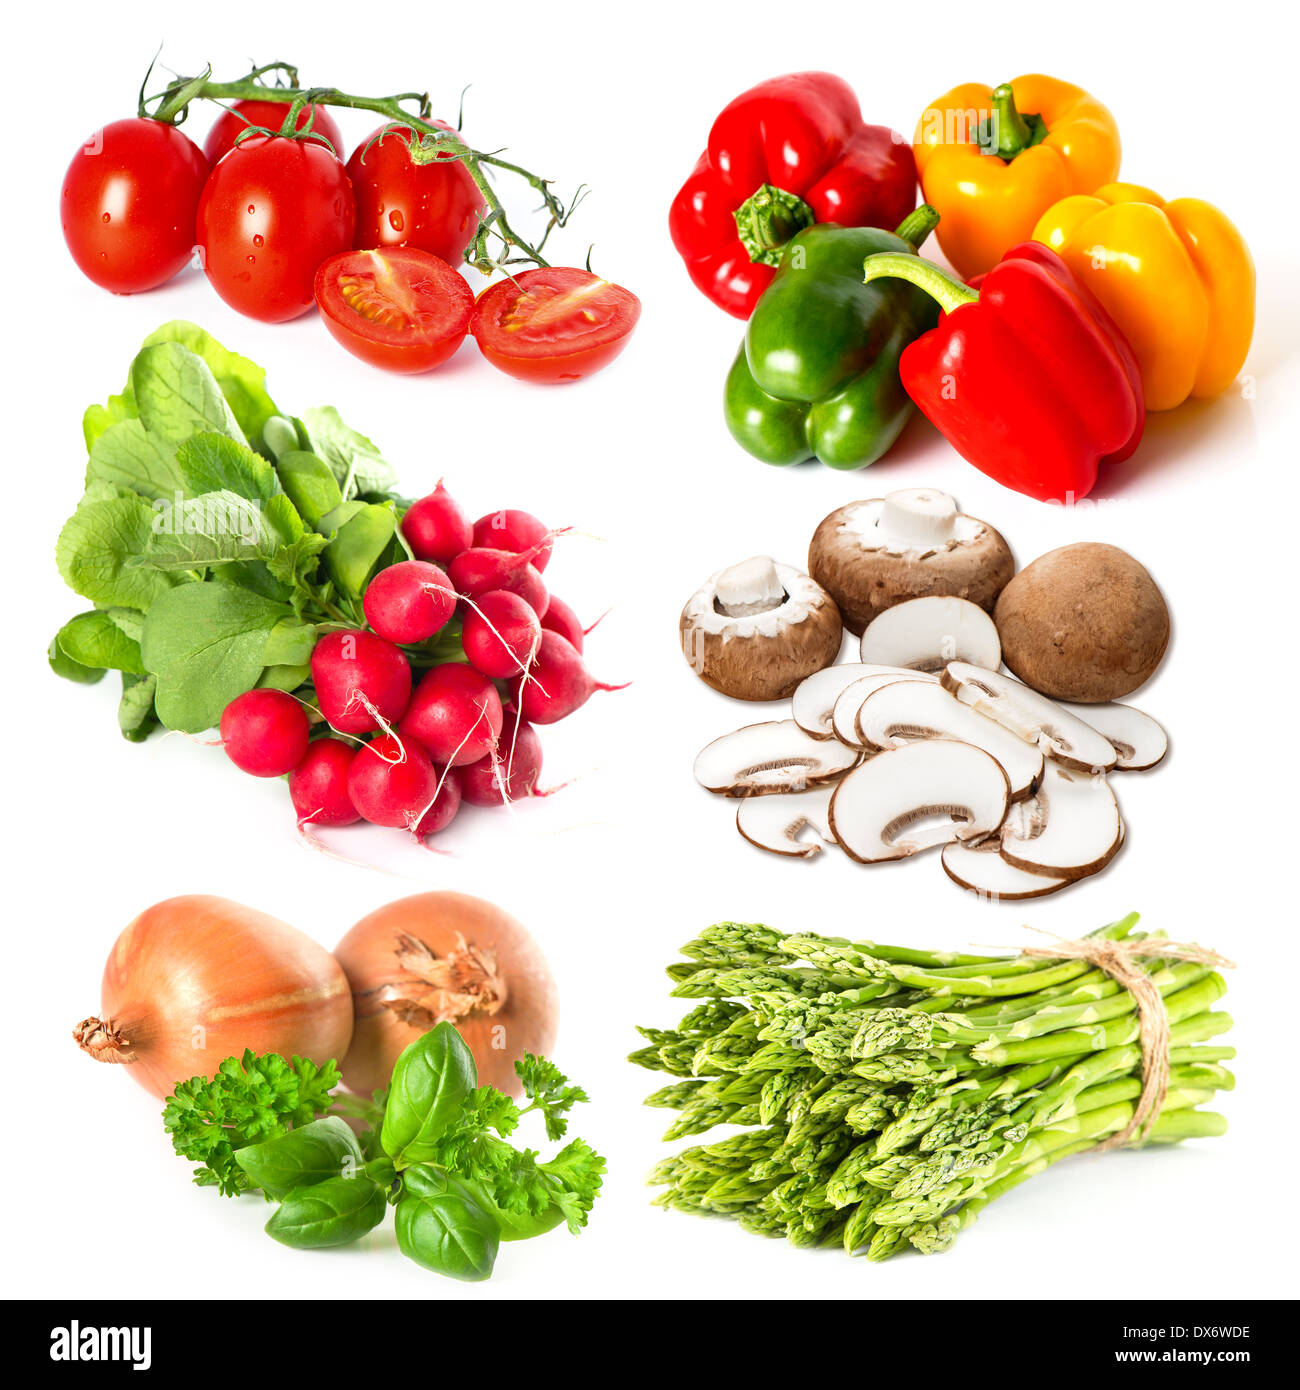 set of frech vegetables and herbs on white background. tomato, asparagus, onion, radish, basil, parsley, pepper, mushrooms Stock Photo